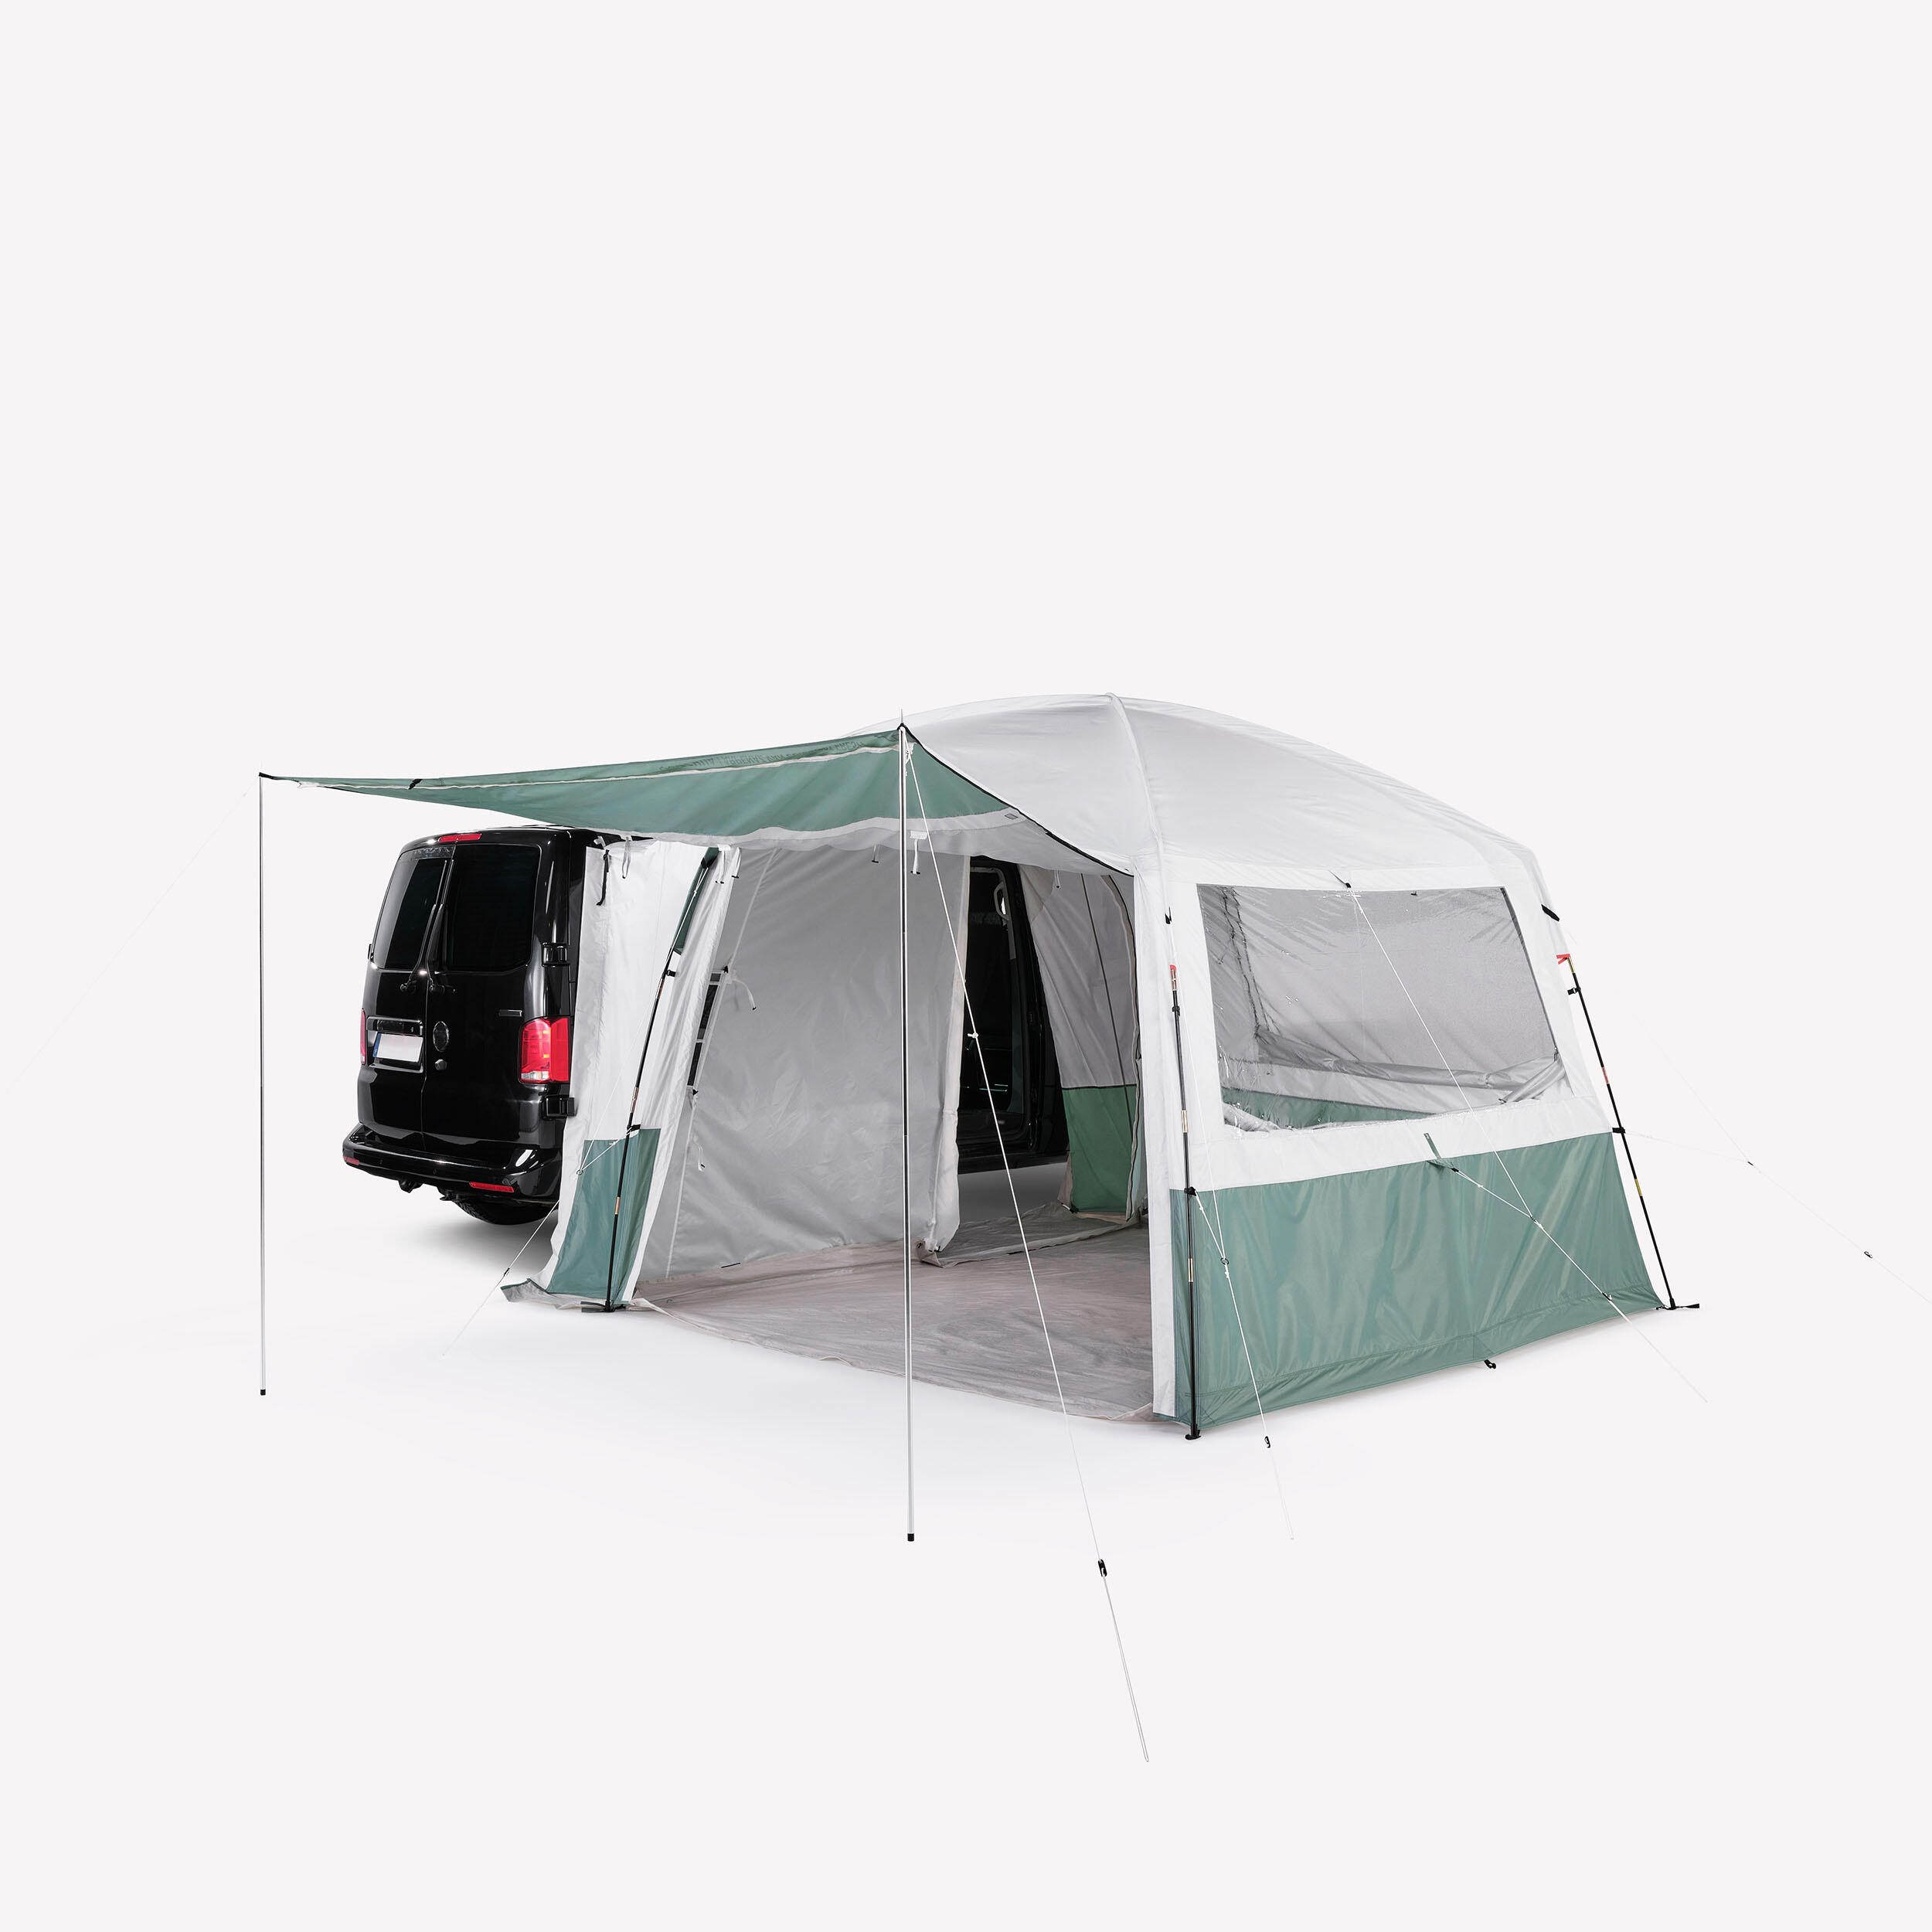 Pole awning for vans and trucks - Van Connect Arpenaz Fresh - 6 people 6/16